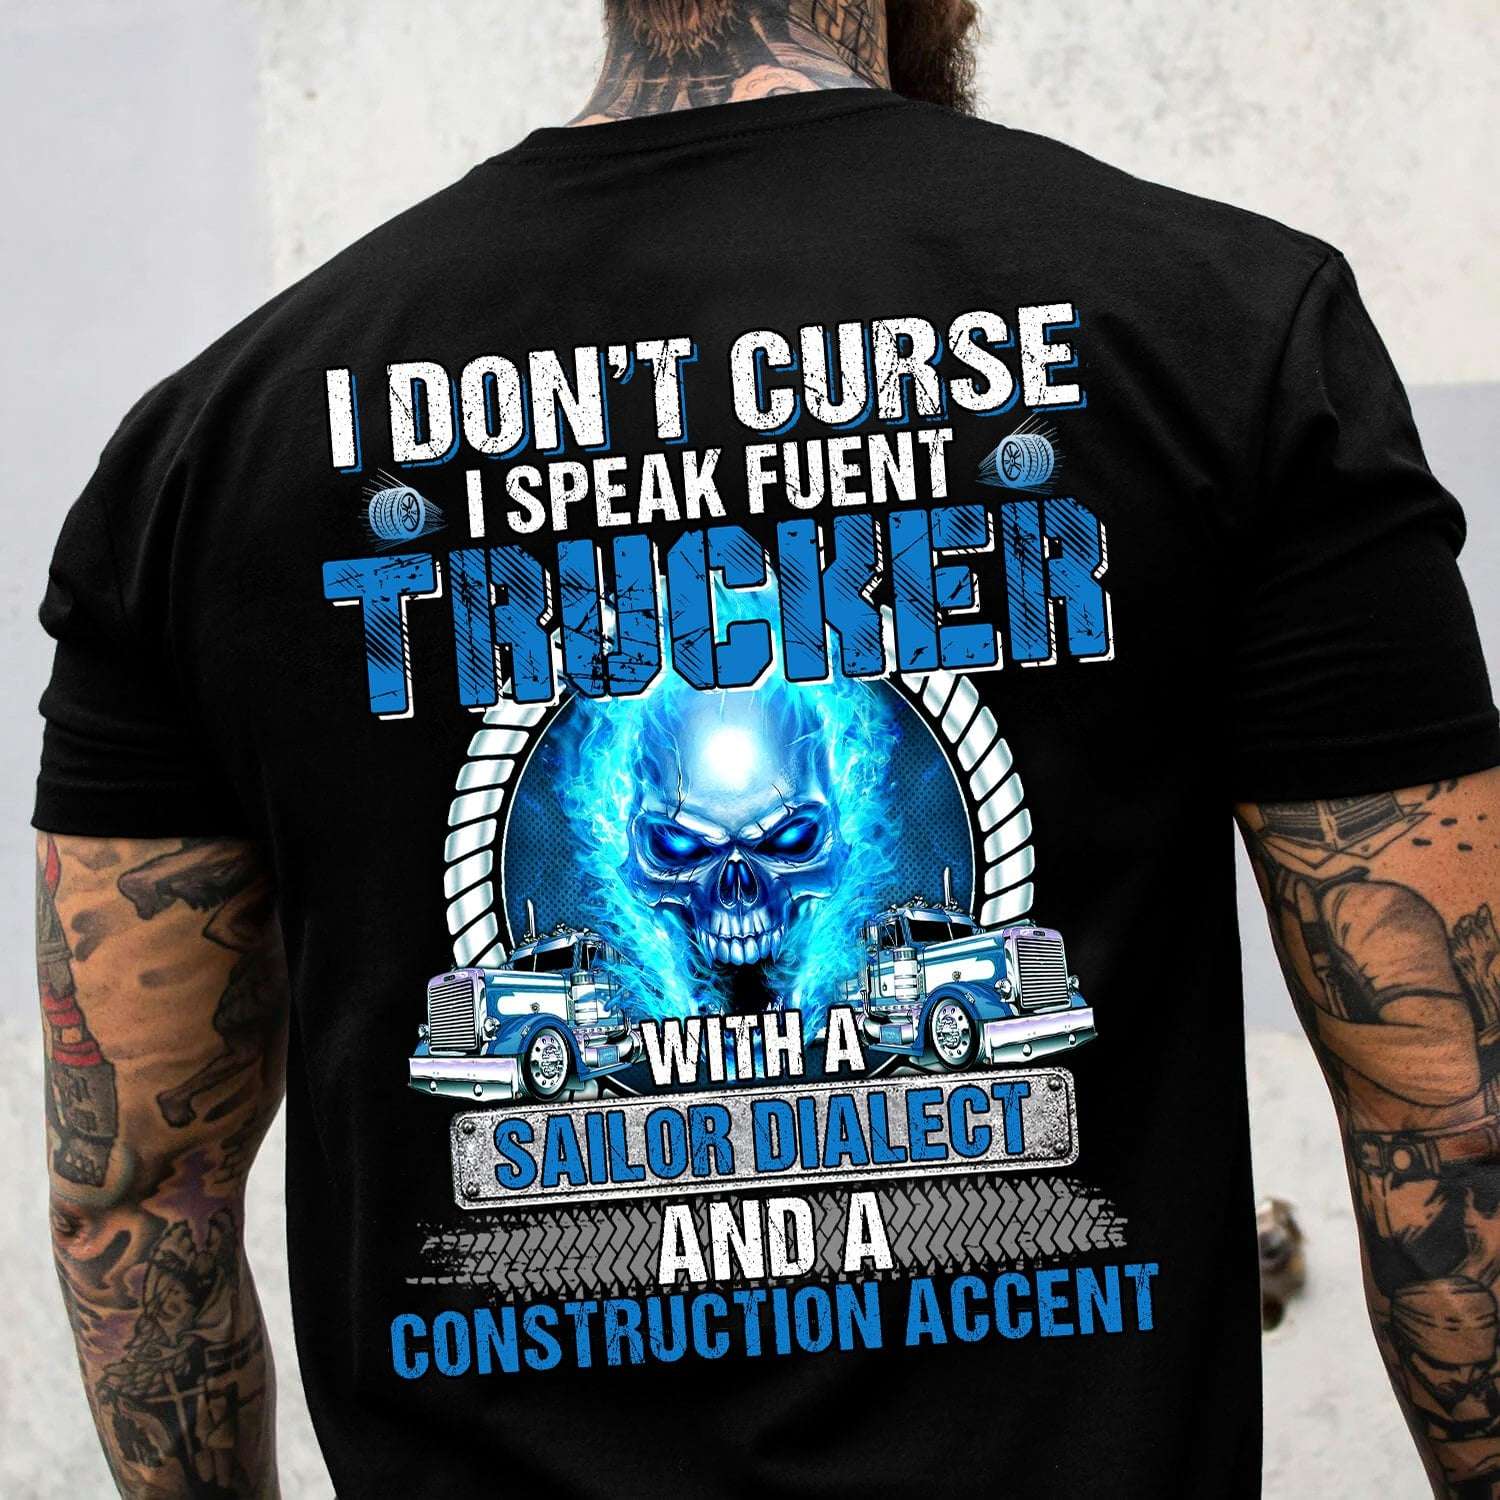 I don't curse I speak fluent trucker with a sailor dialect and a construction accent